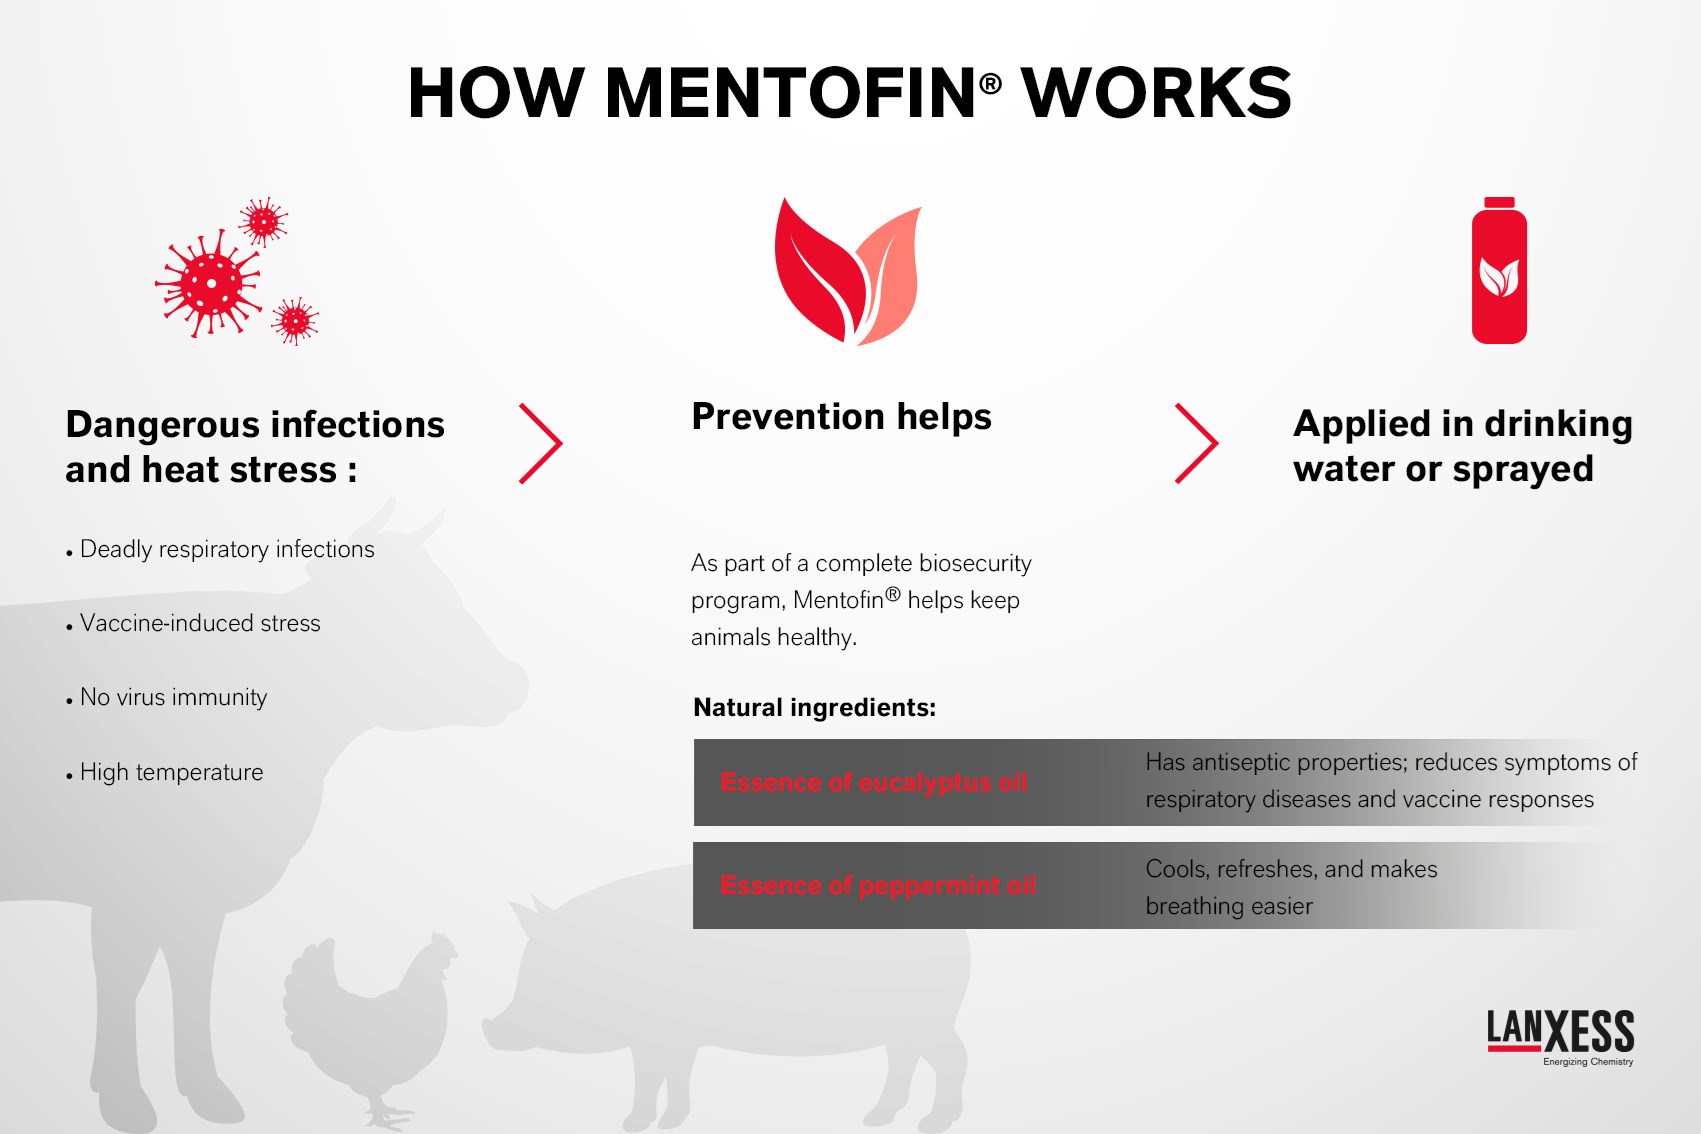 How Mentofin works